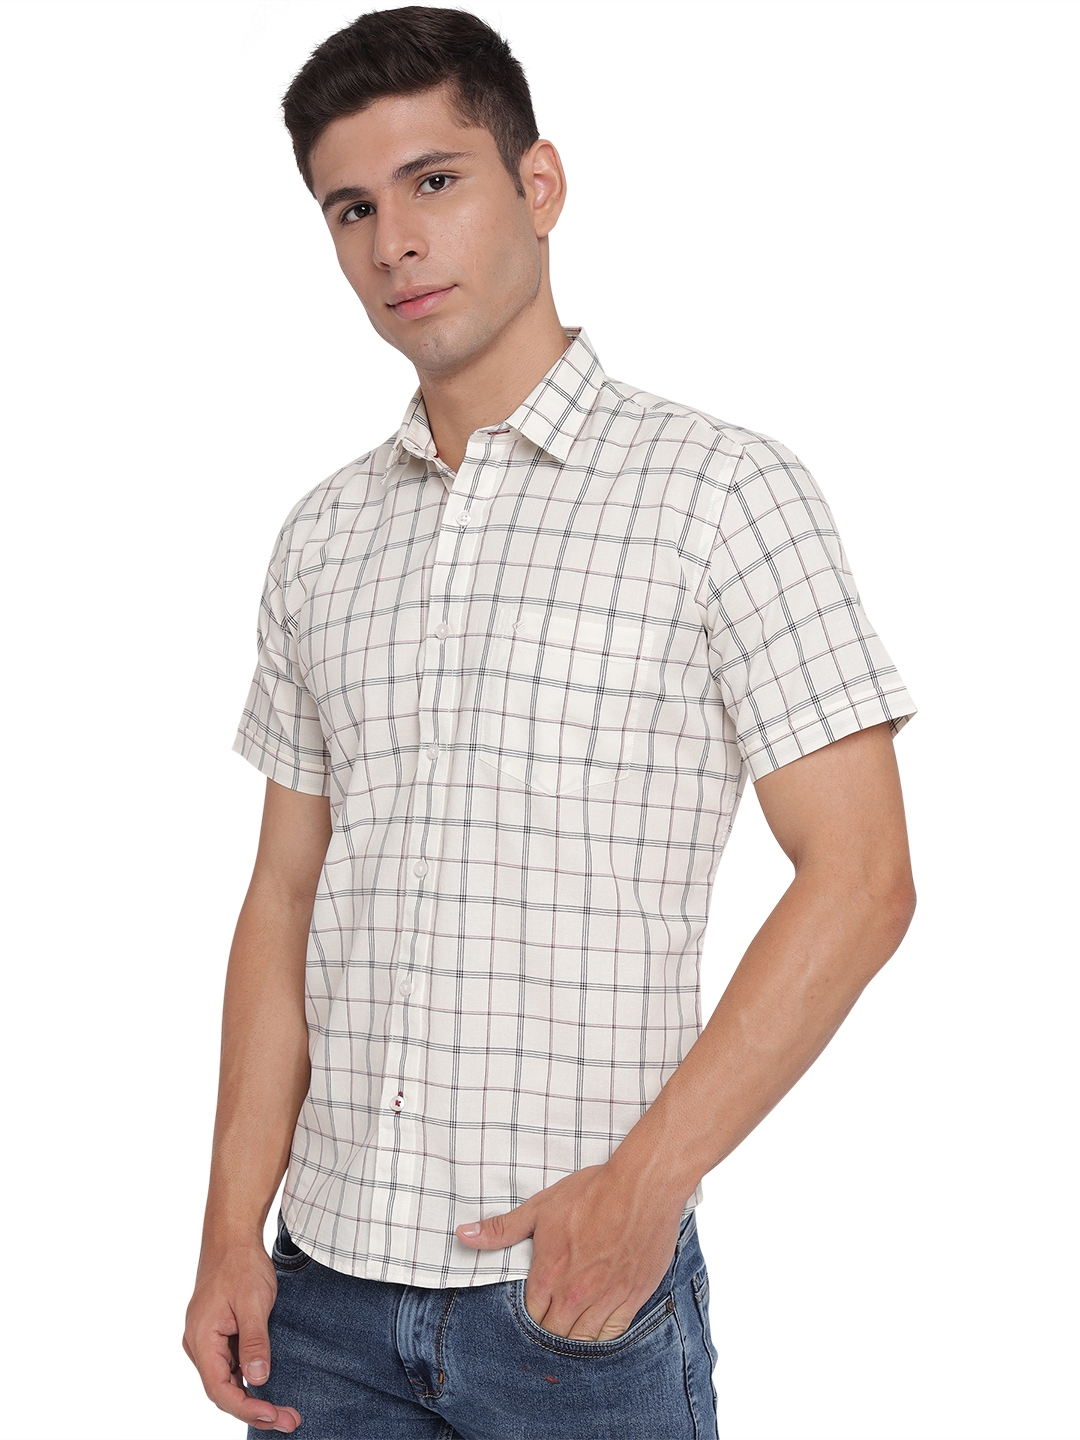 Greenfibre | White Checked Slim Fit Casual Shirt | Greenfibre 1